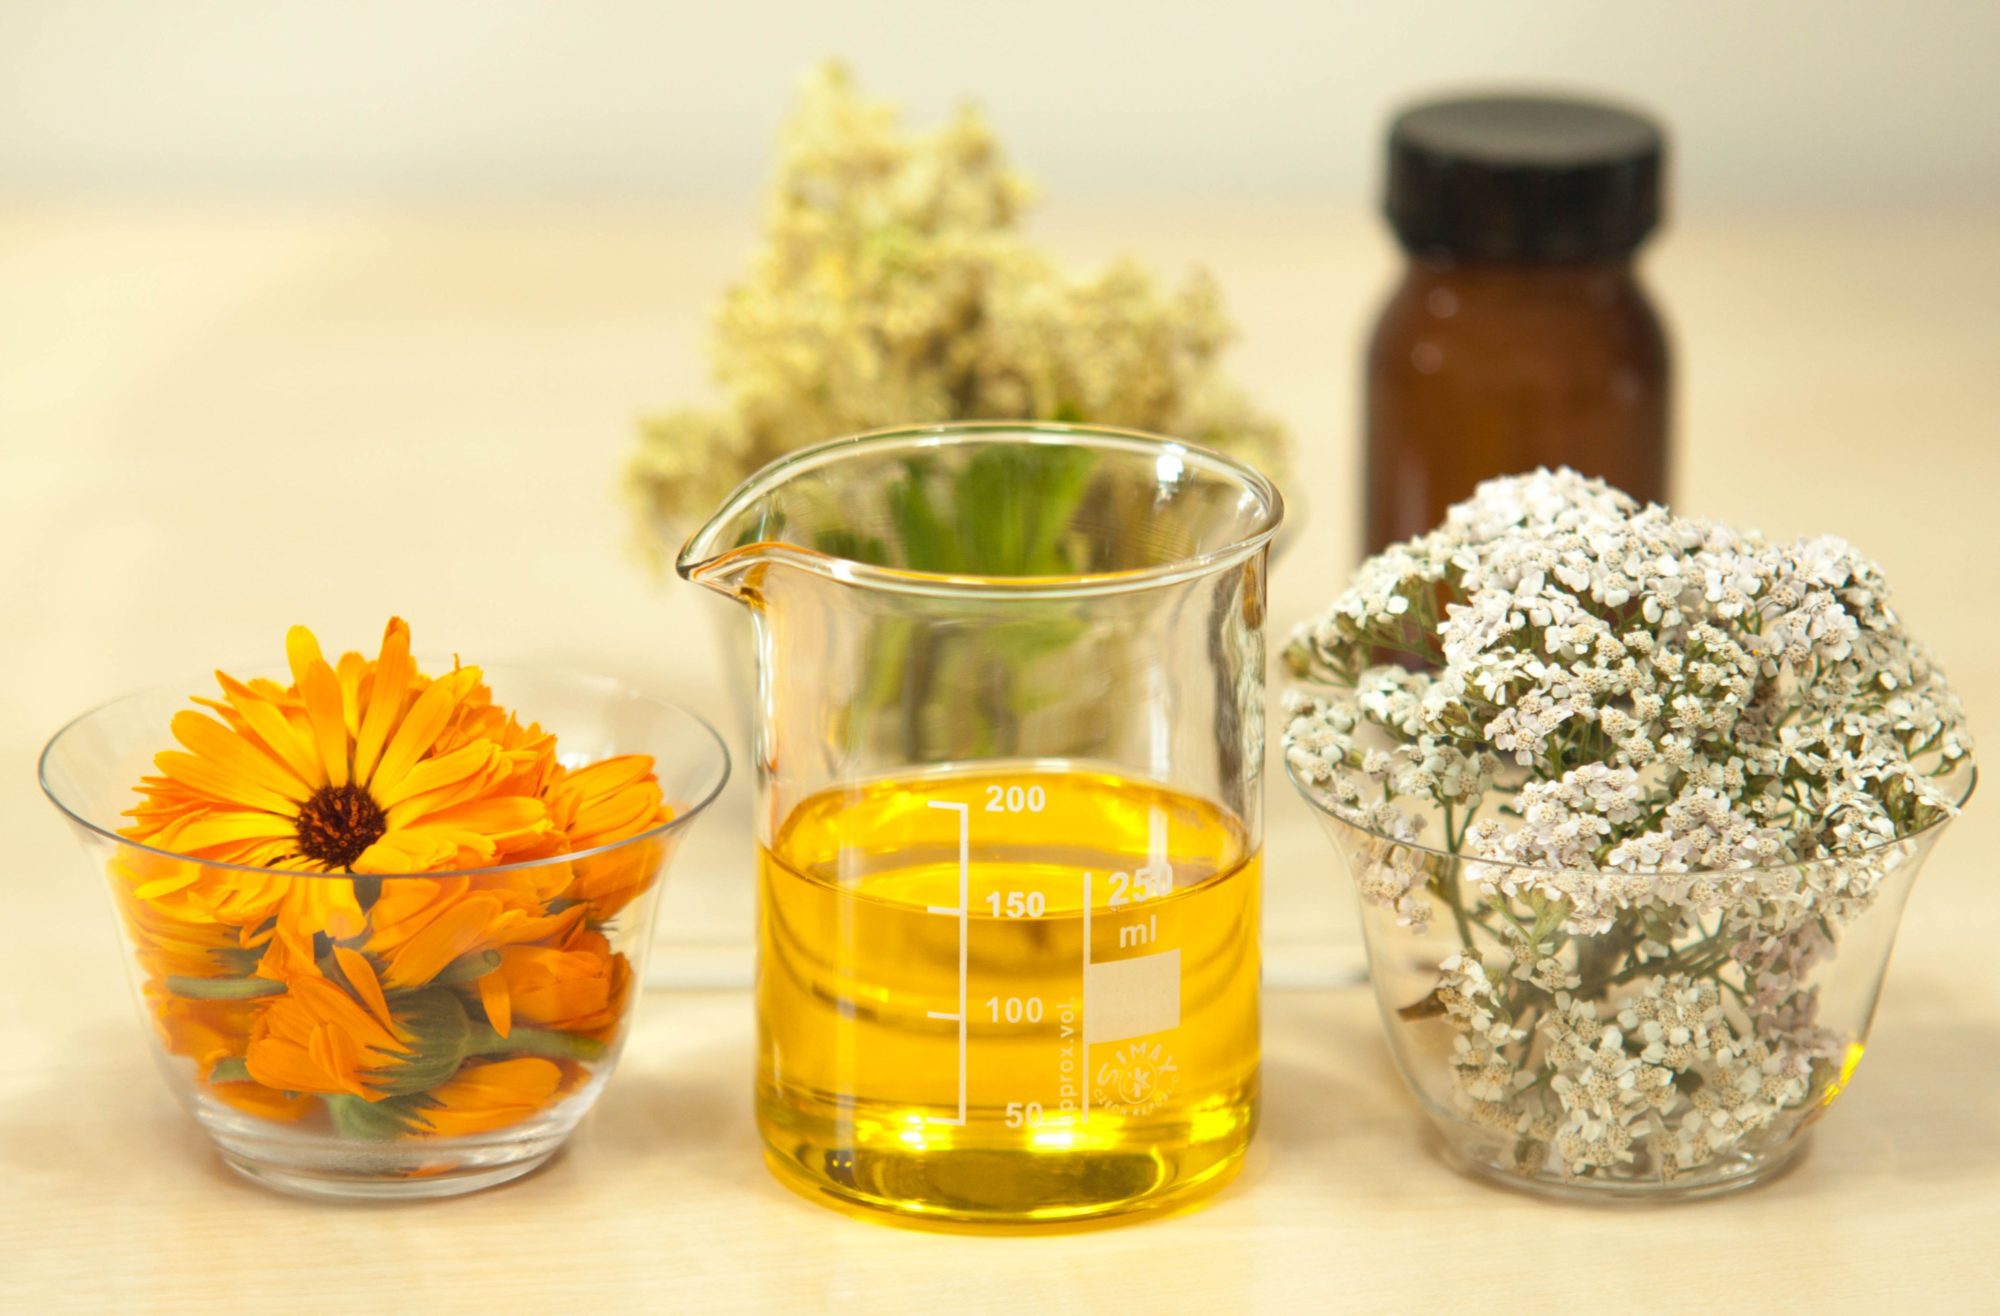 Reverse Aging With These 7 Essential Oils